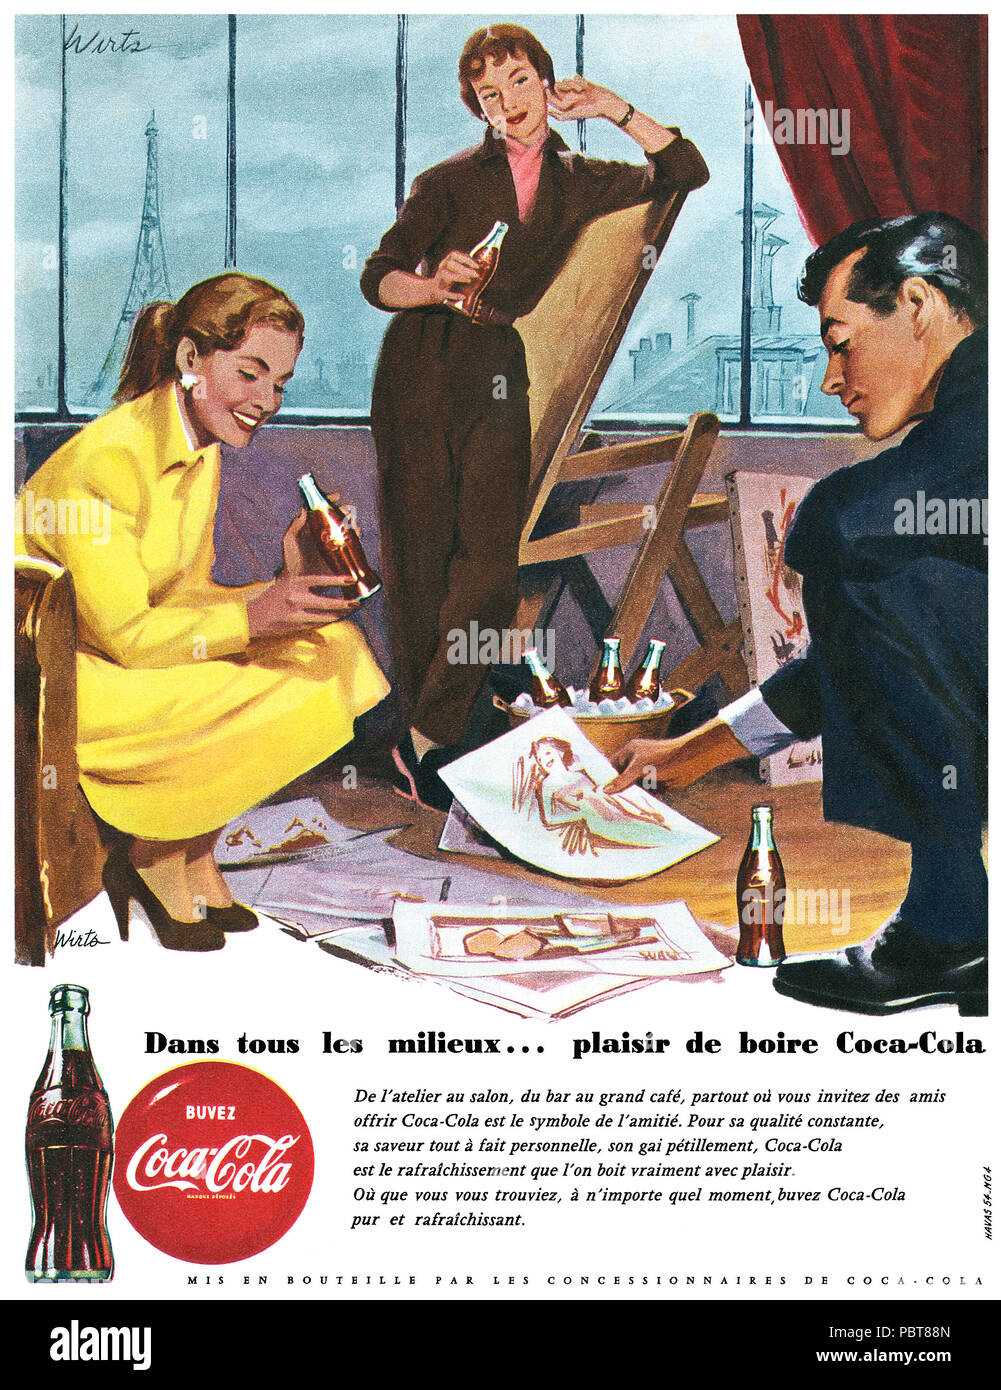 Culture Re-View: Iconic moments in Coca-Cola's advertising history